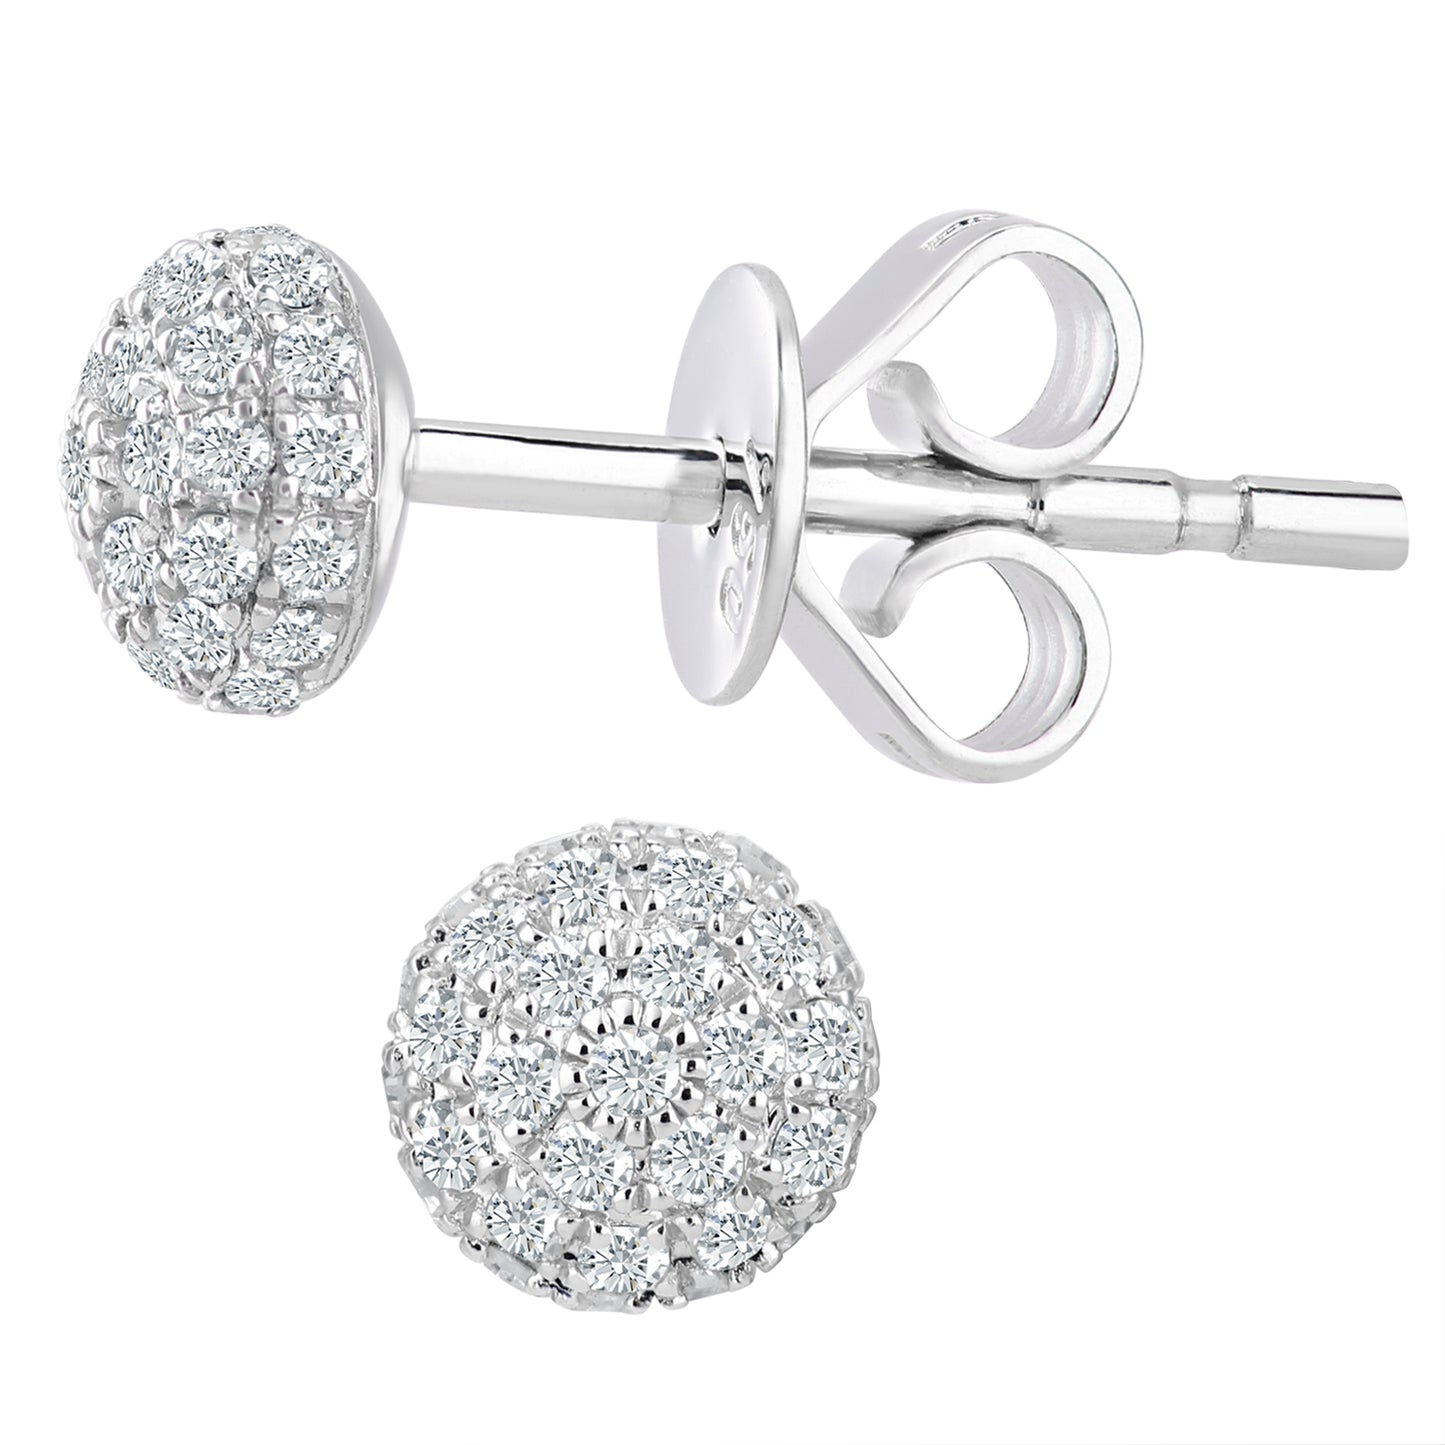 18ct White Gold  Round 10pts Diamond Cluster Stud Earrings - DE1AXL409-18KW